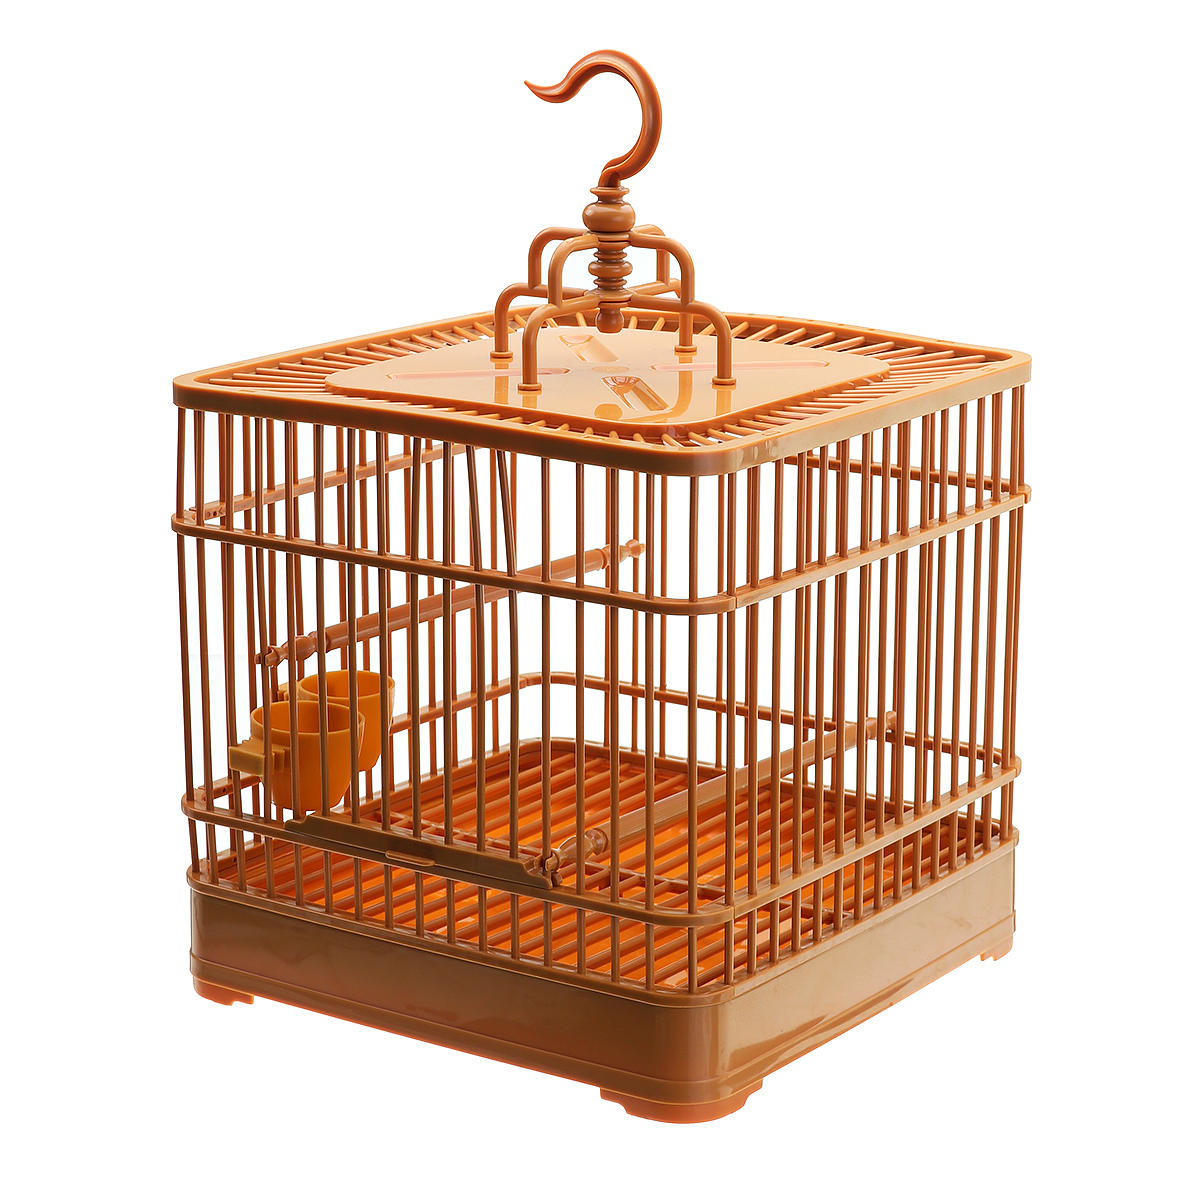 Birds Cage Plastic Hanging Feed Holder Parrot Macaw Pets Carrier Portable Set Bird Net-heyidear